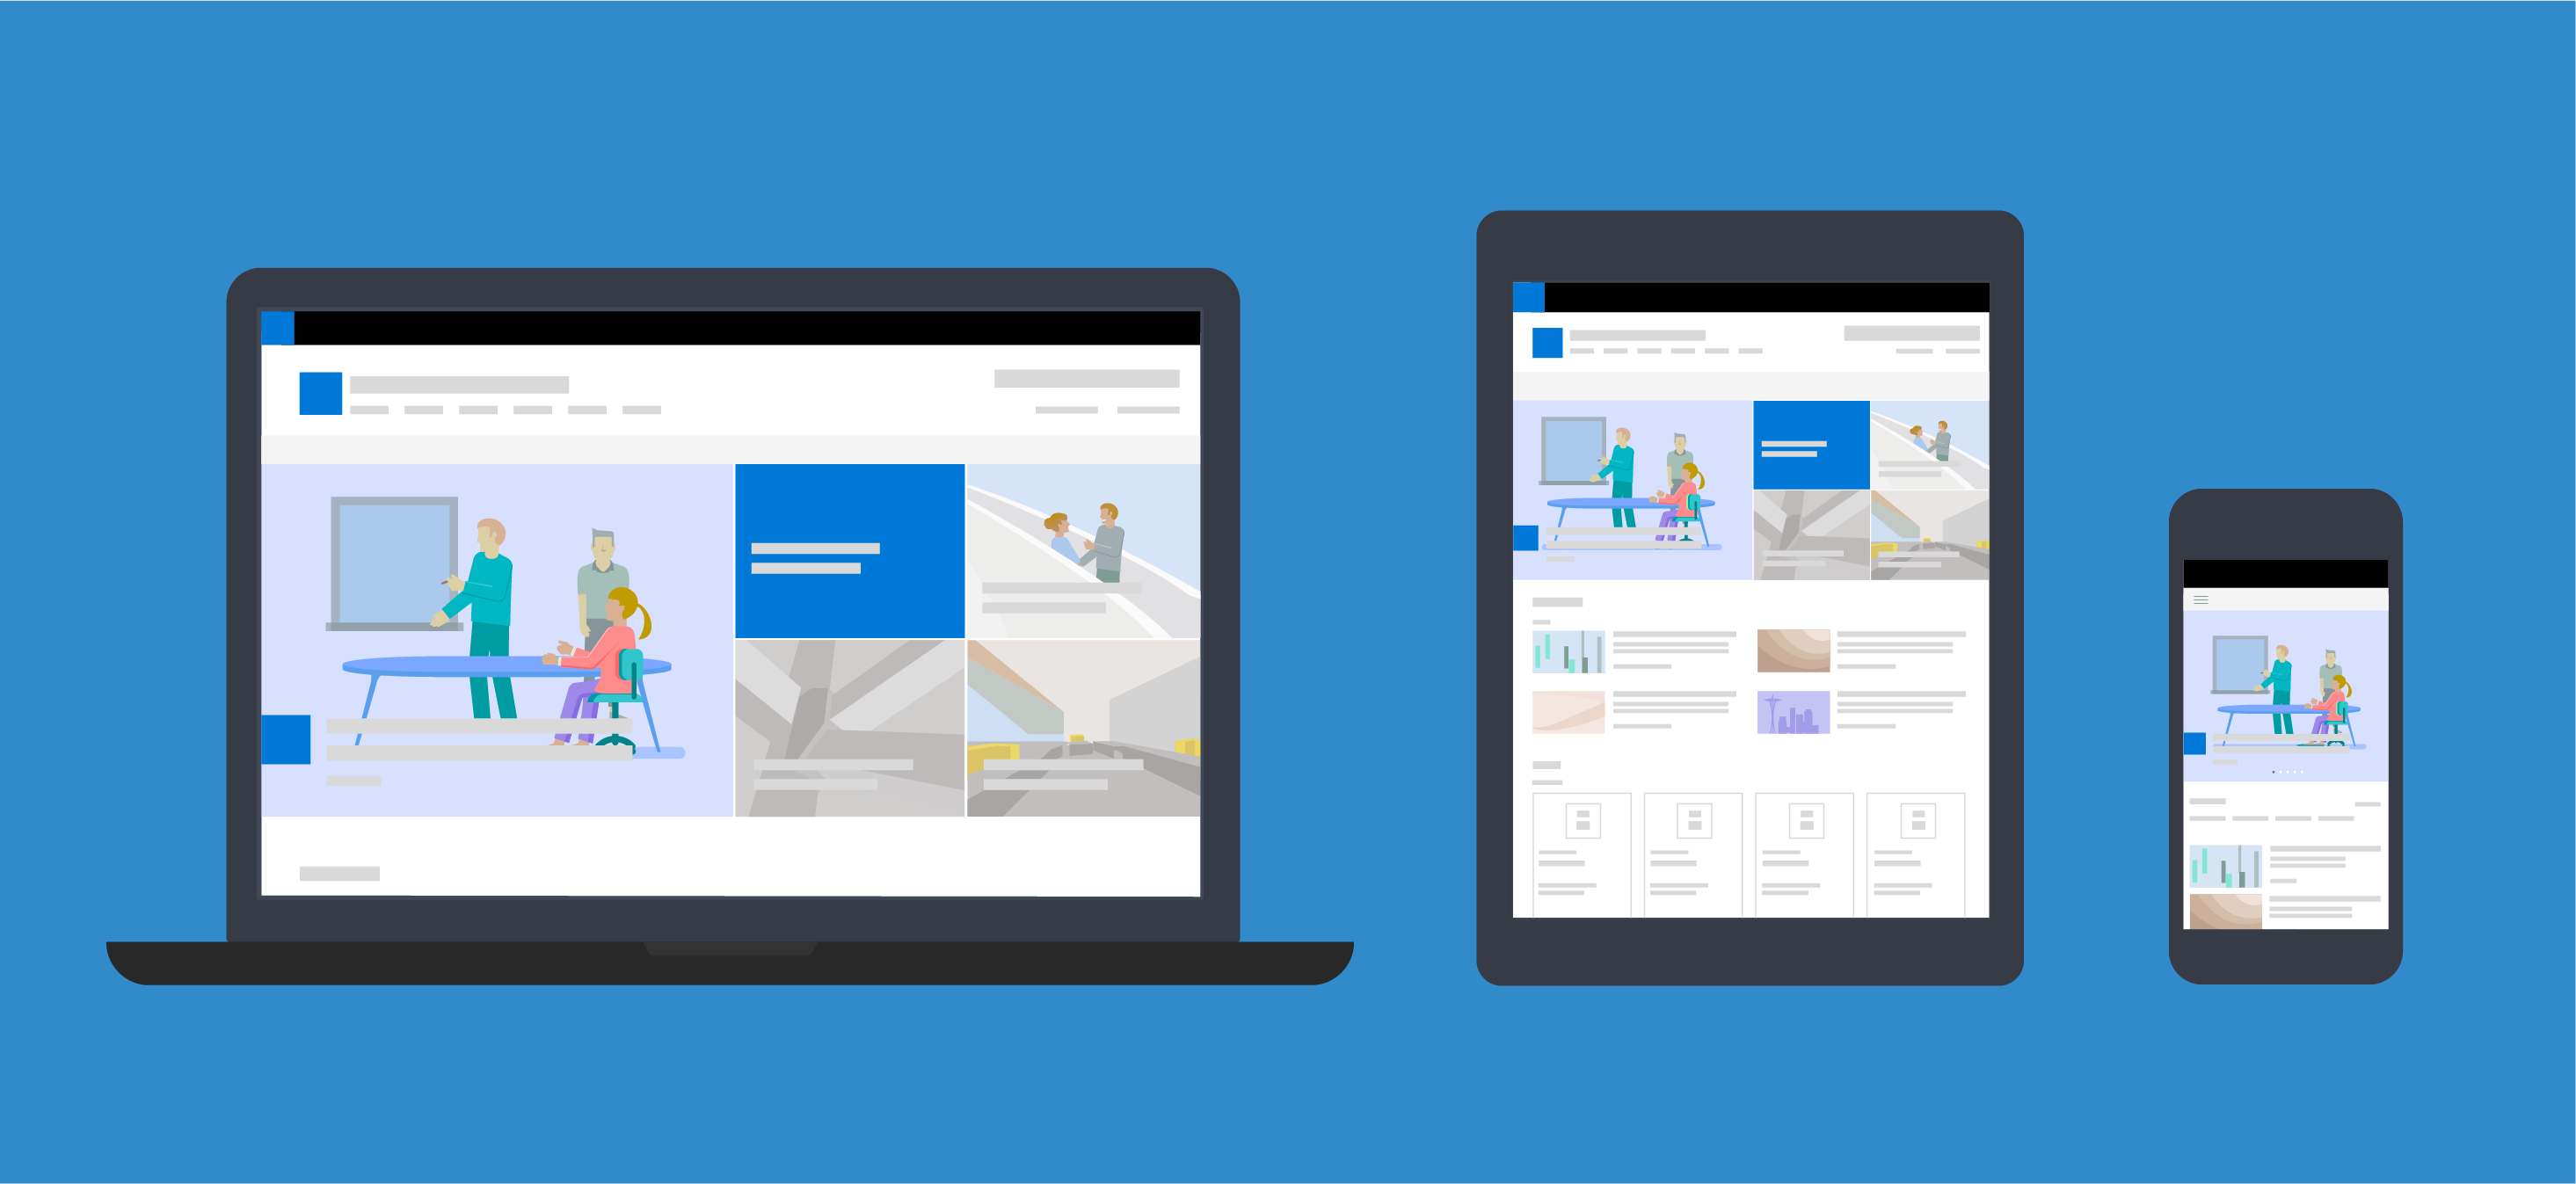 SharePoint communication site on multiple devices